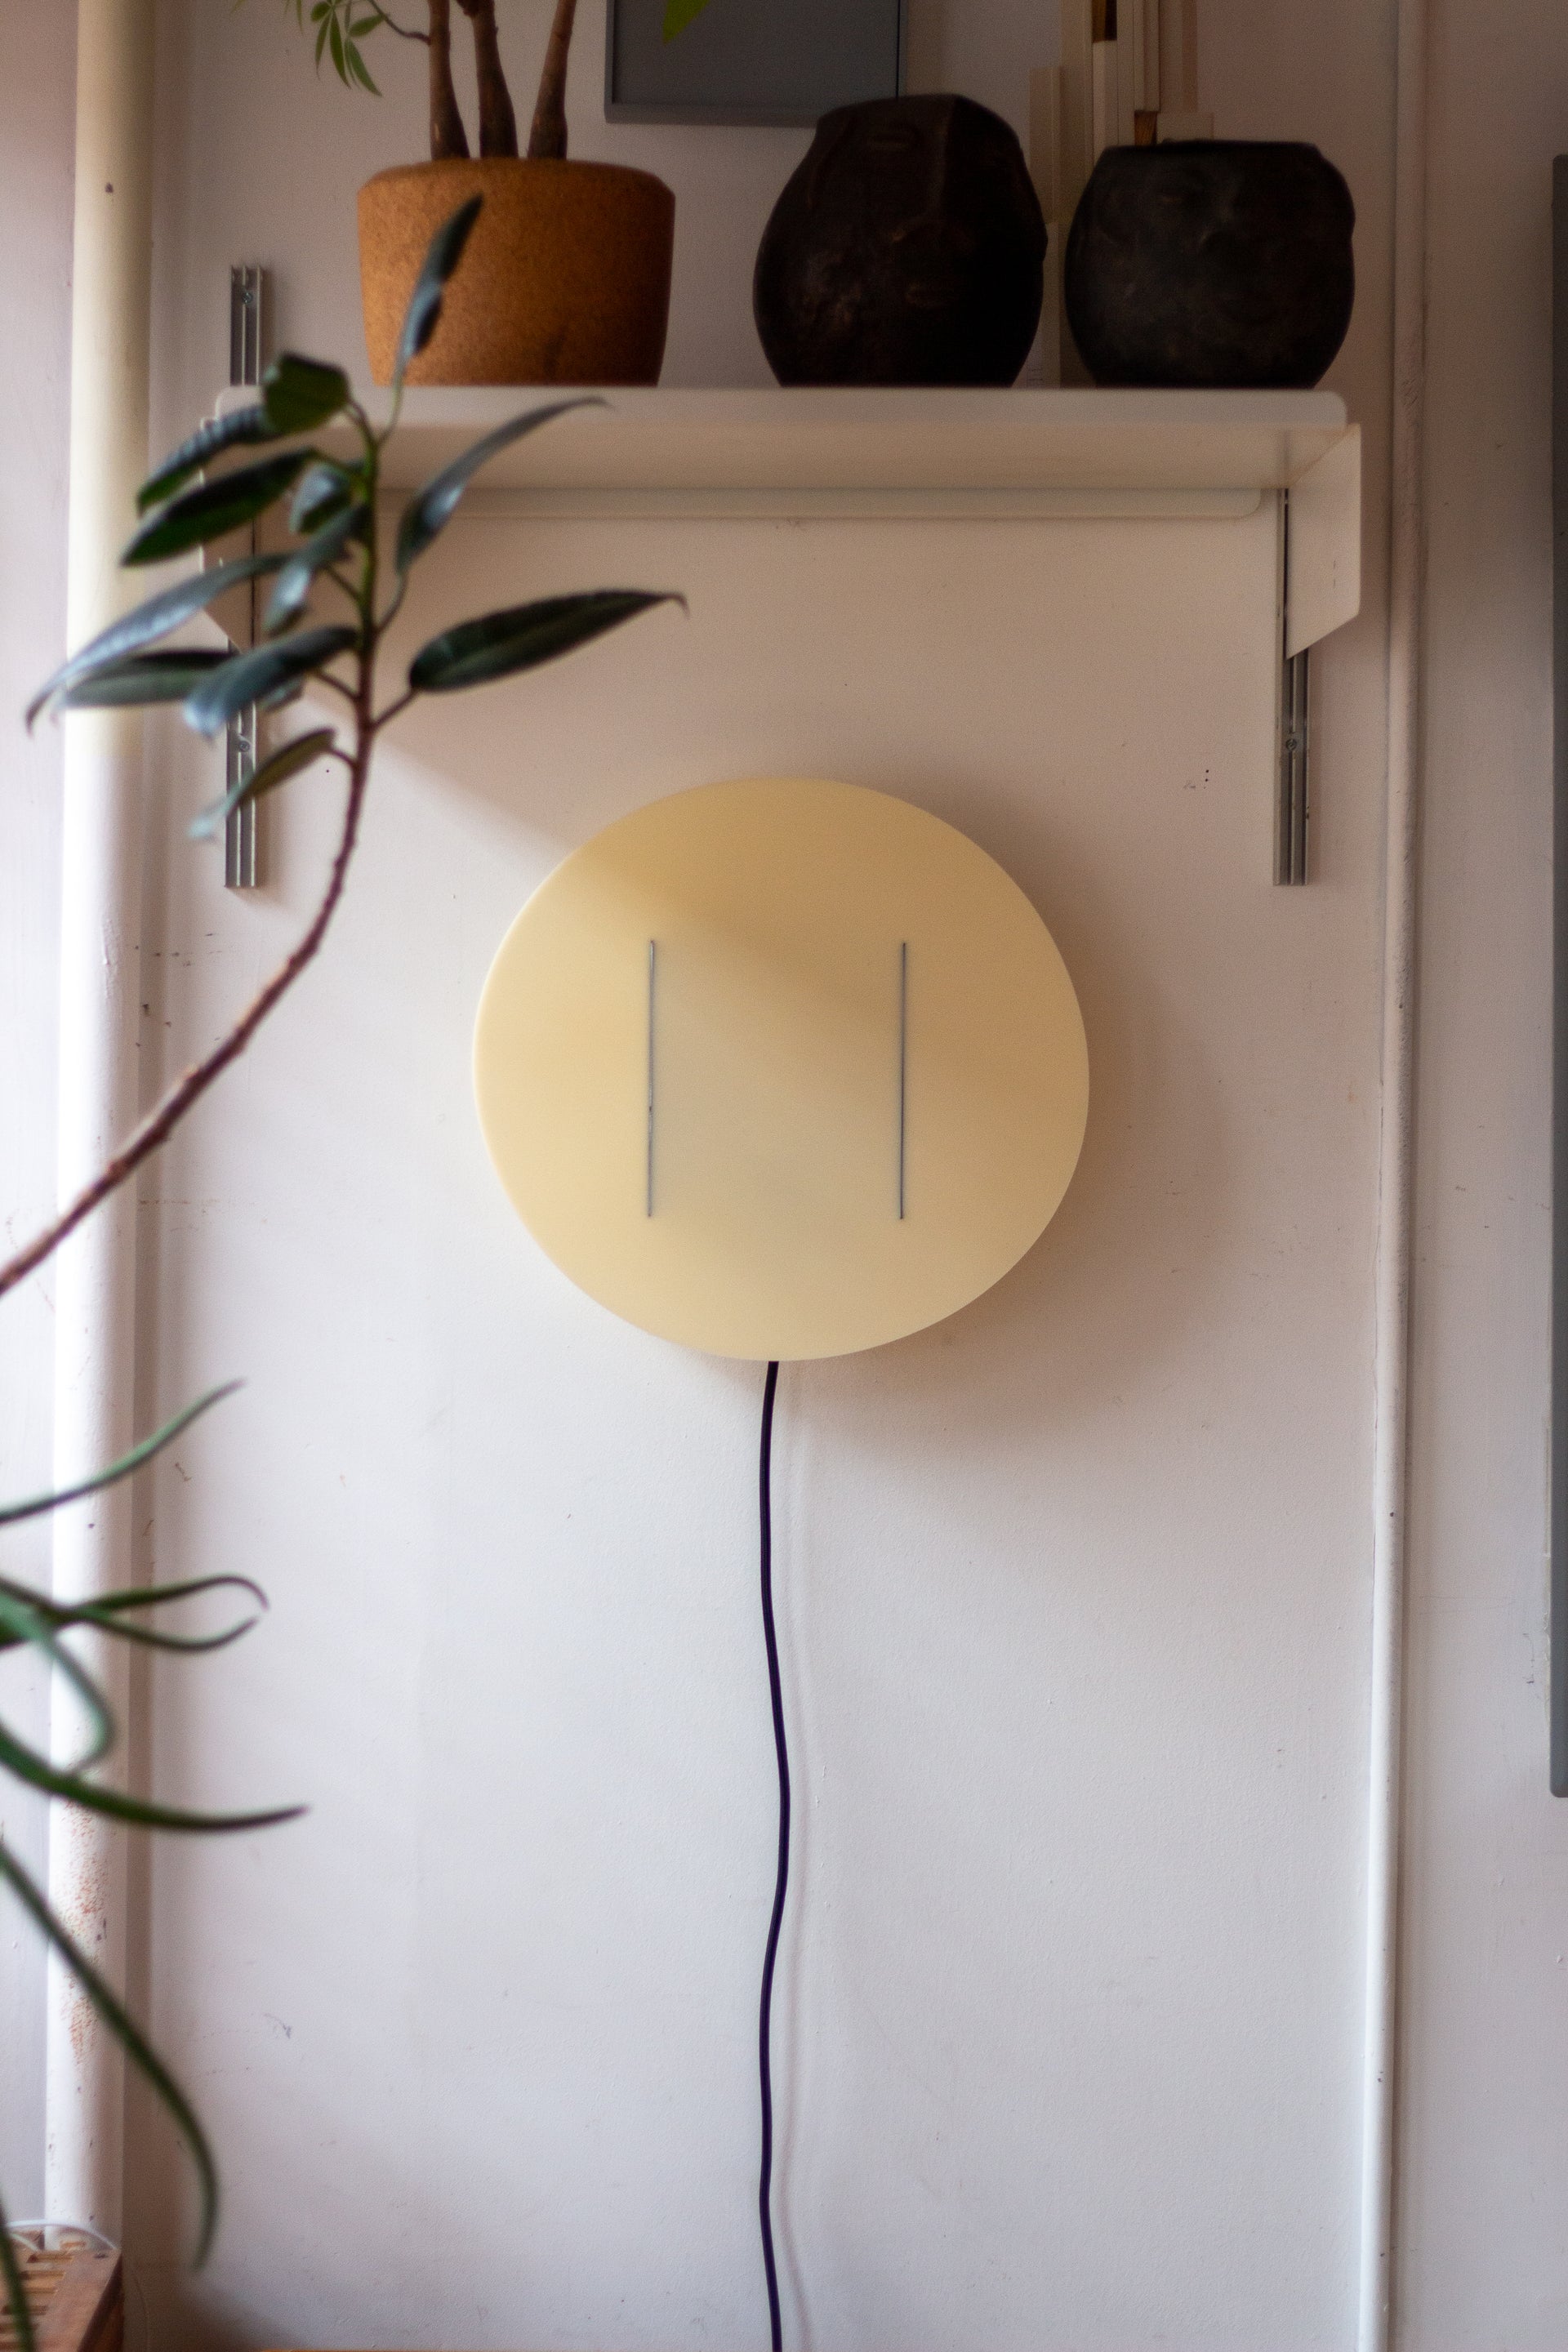 Puddle Sconce (BUTTER) by Christine Espinal & Alvaro Ucha Rodriguez